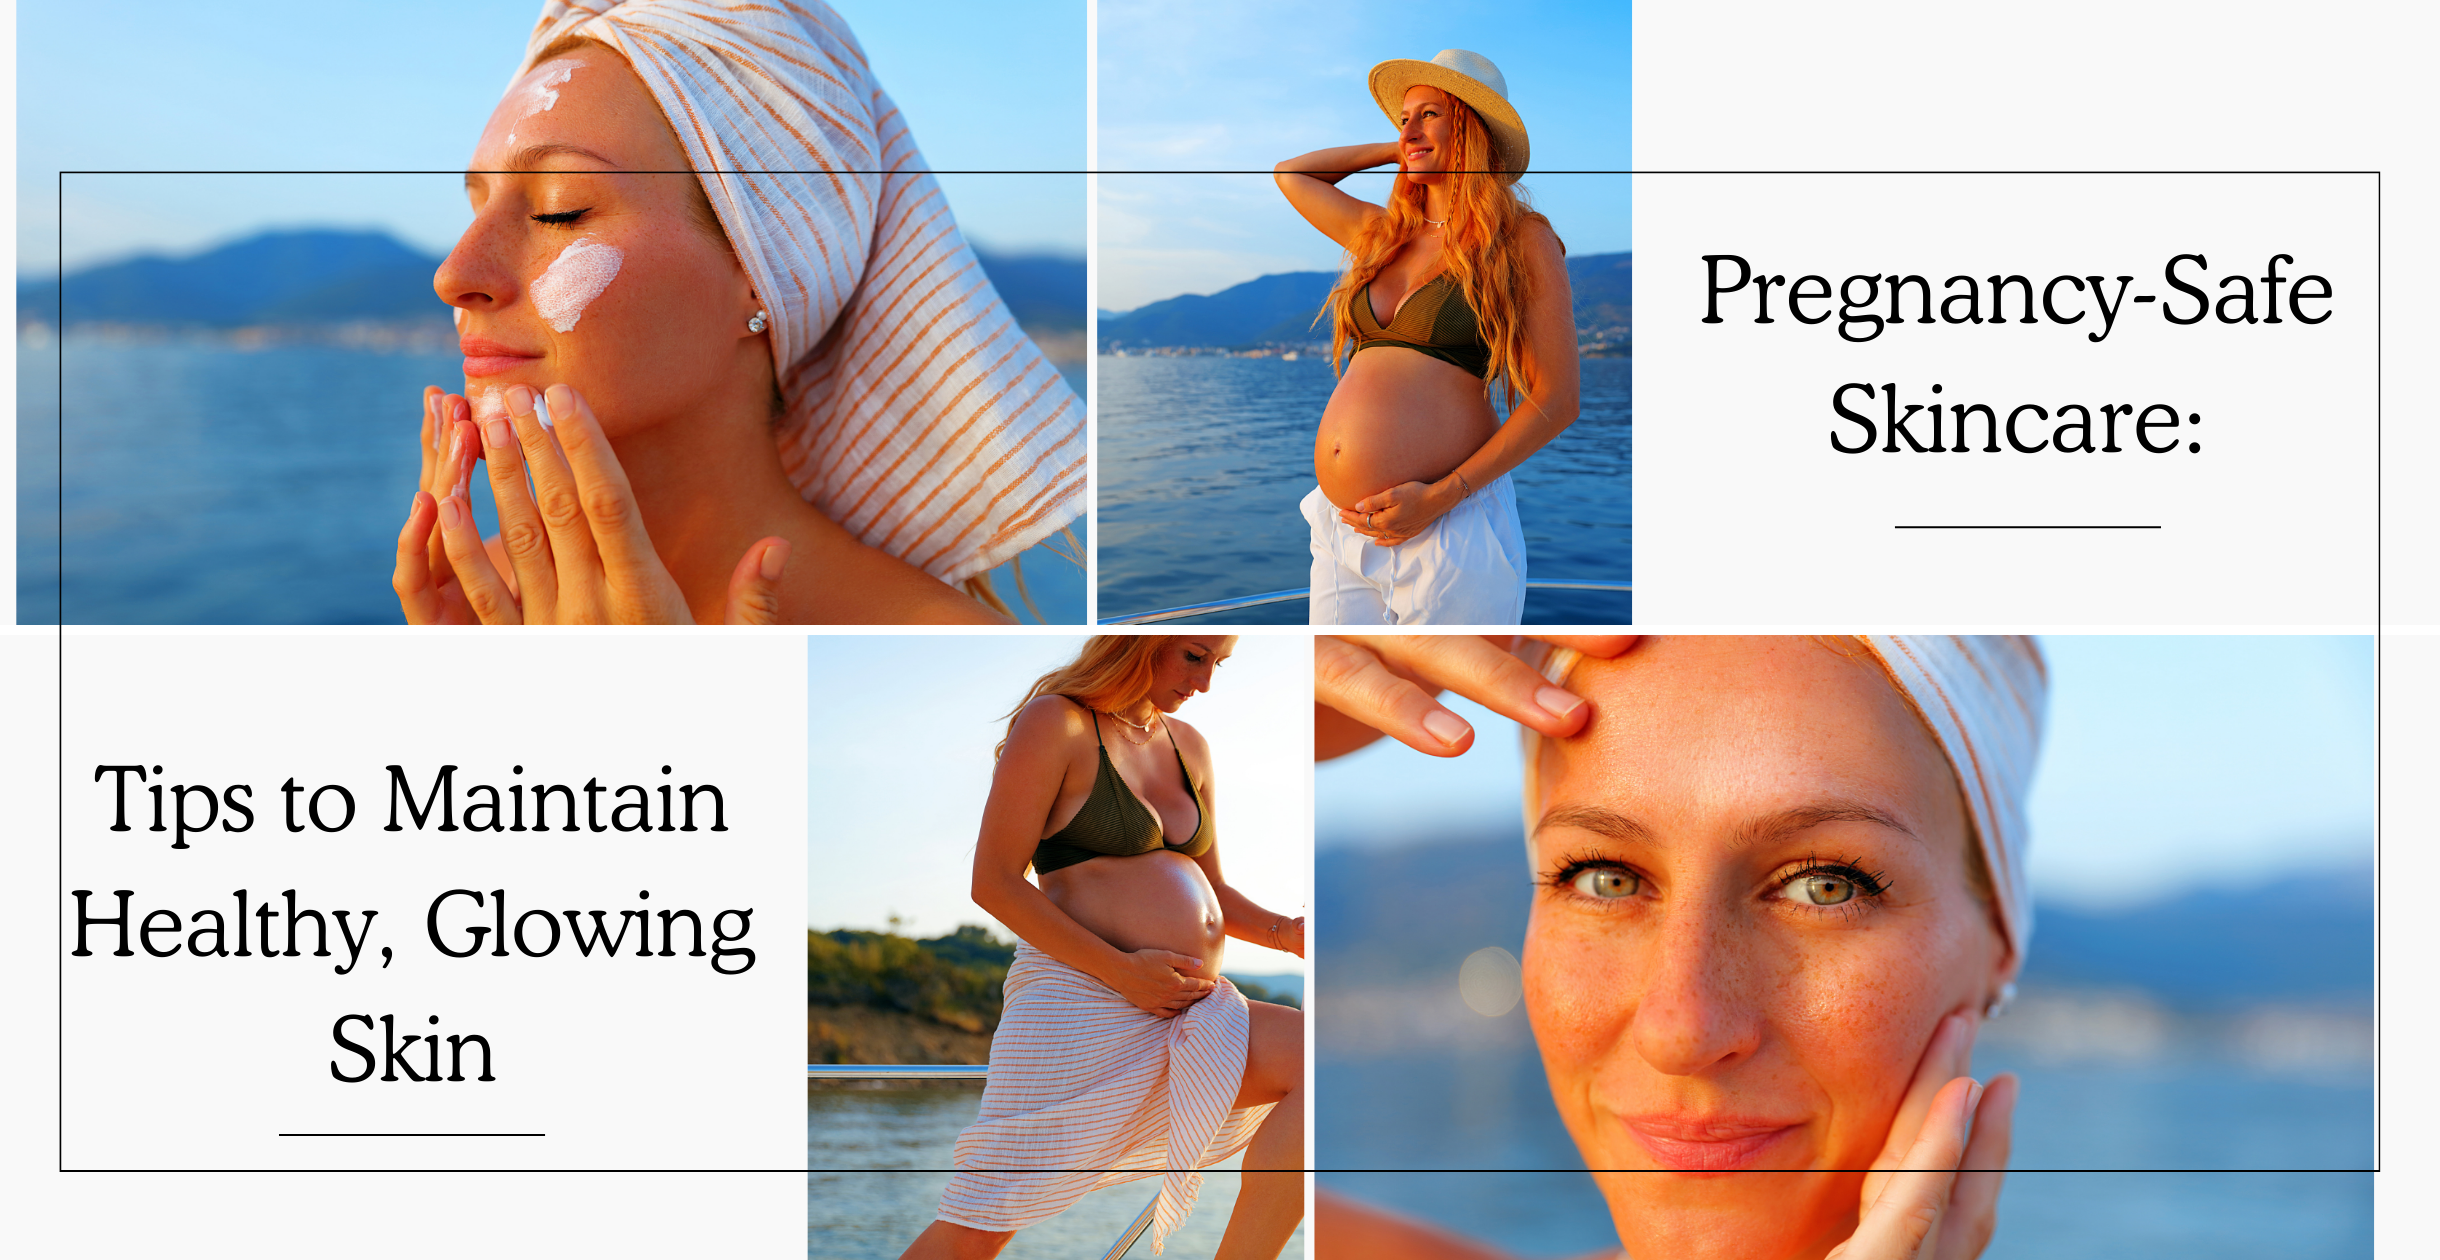 Pregnancy-Safe Skincare: Tips to Maintain Healthy, Glowing Skin